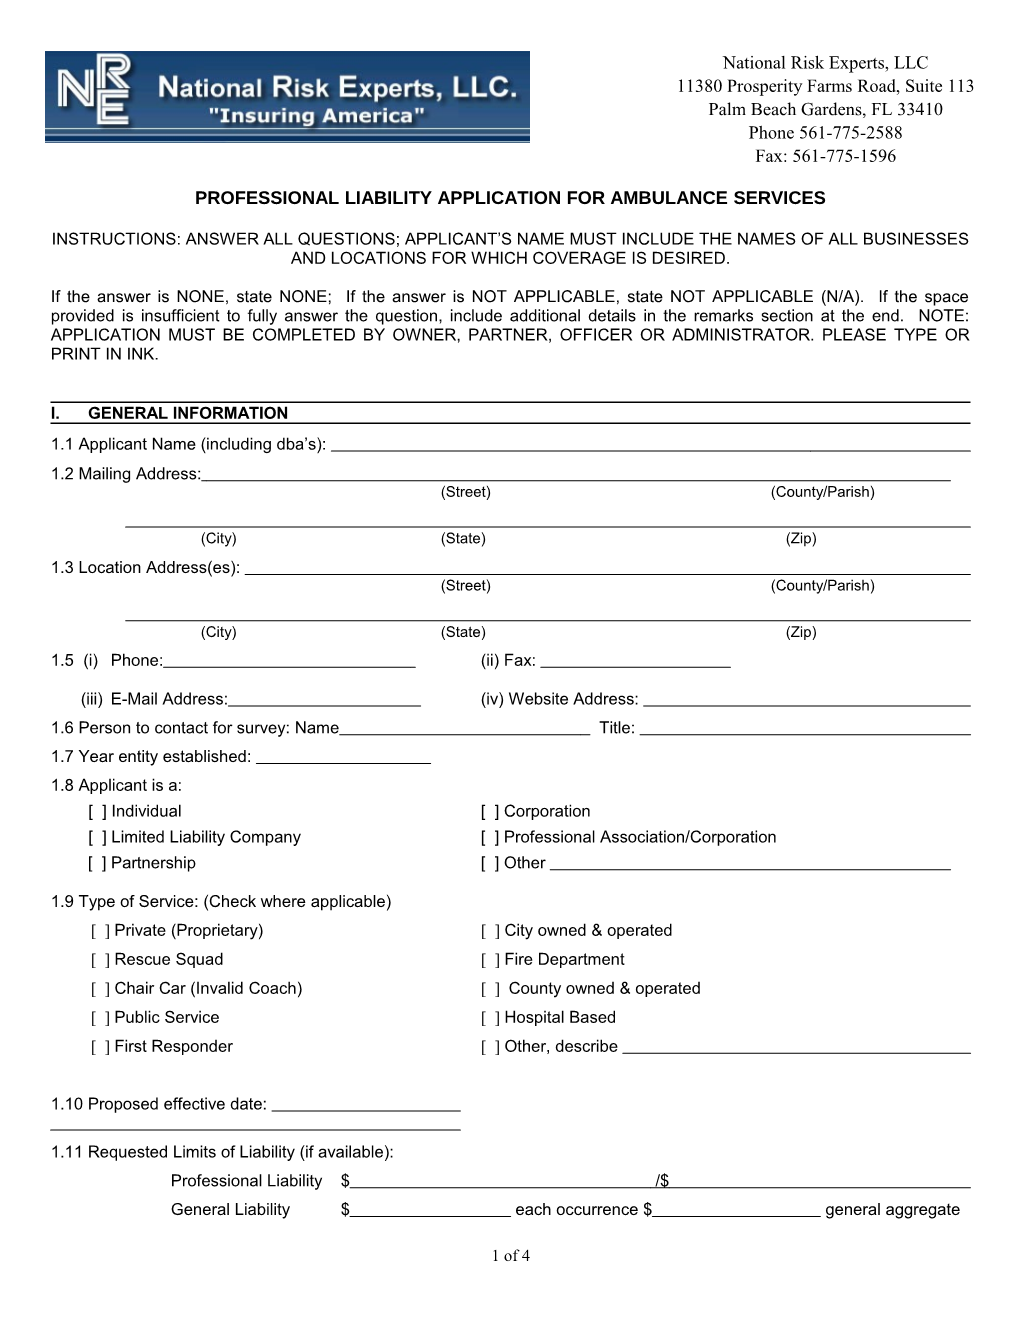 Professional Liability Application for Ambulance Services